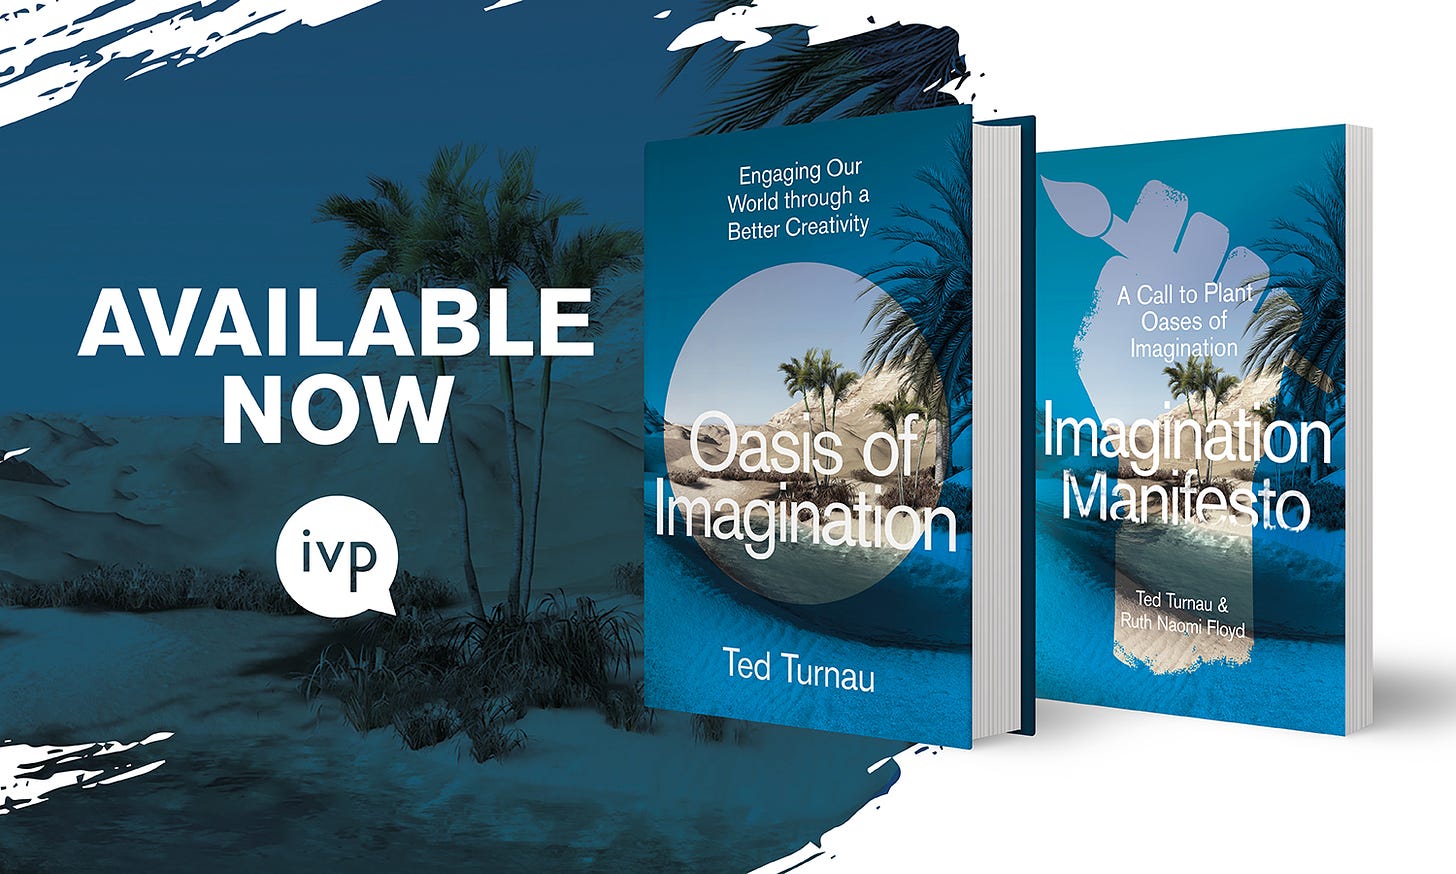 Banner with book covers for Oasis of Imagination and Imagination Manifesto - available now from IVP.